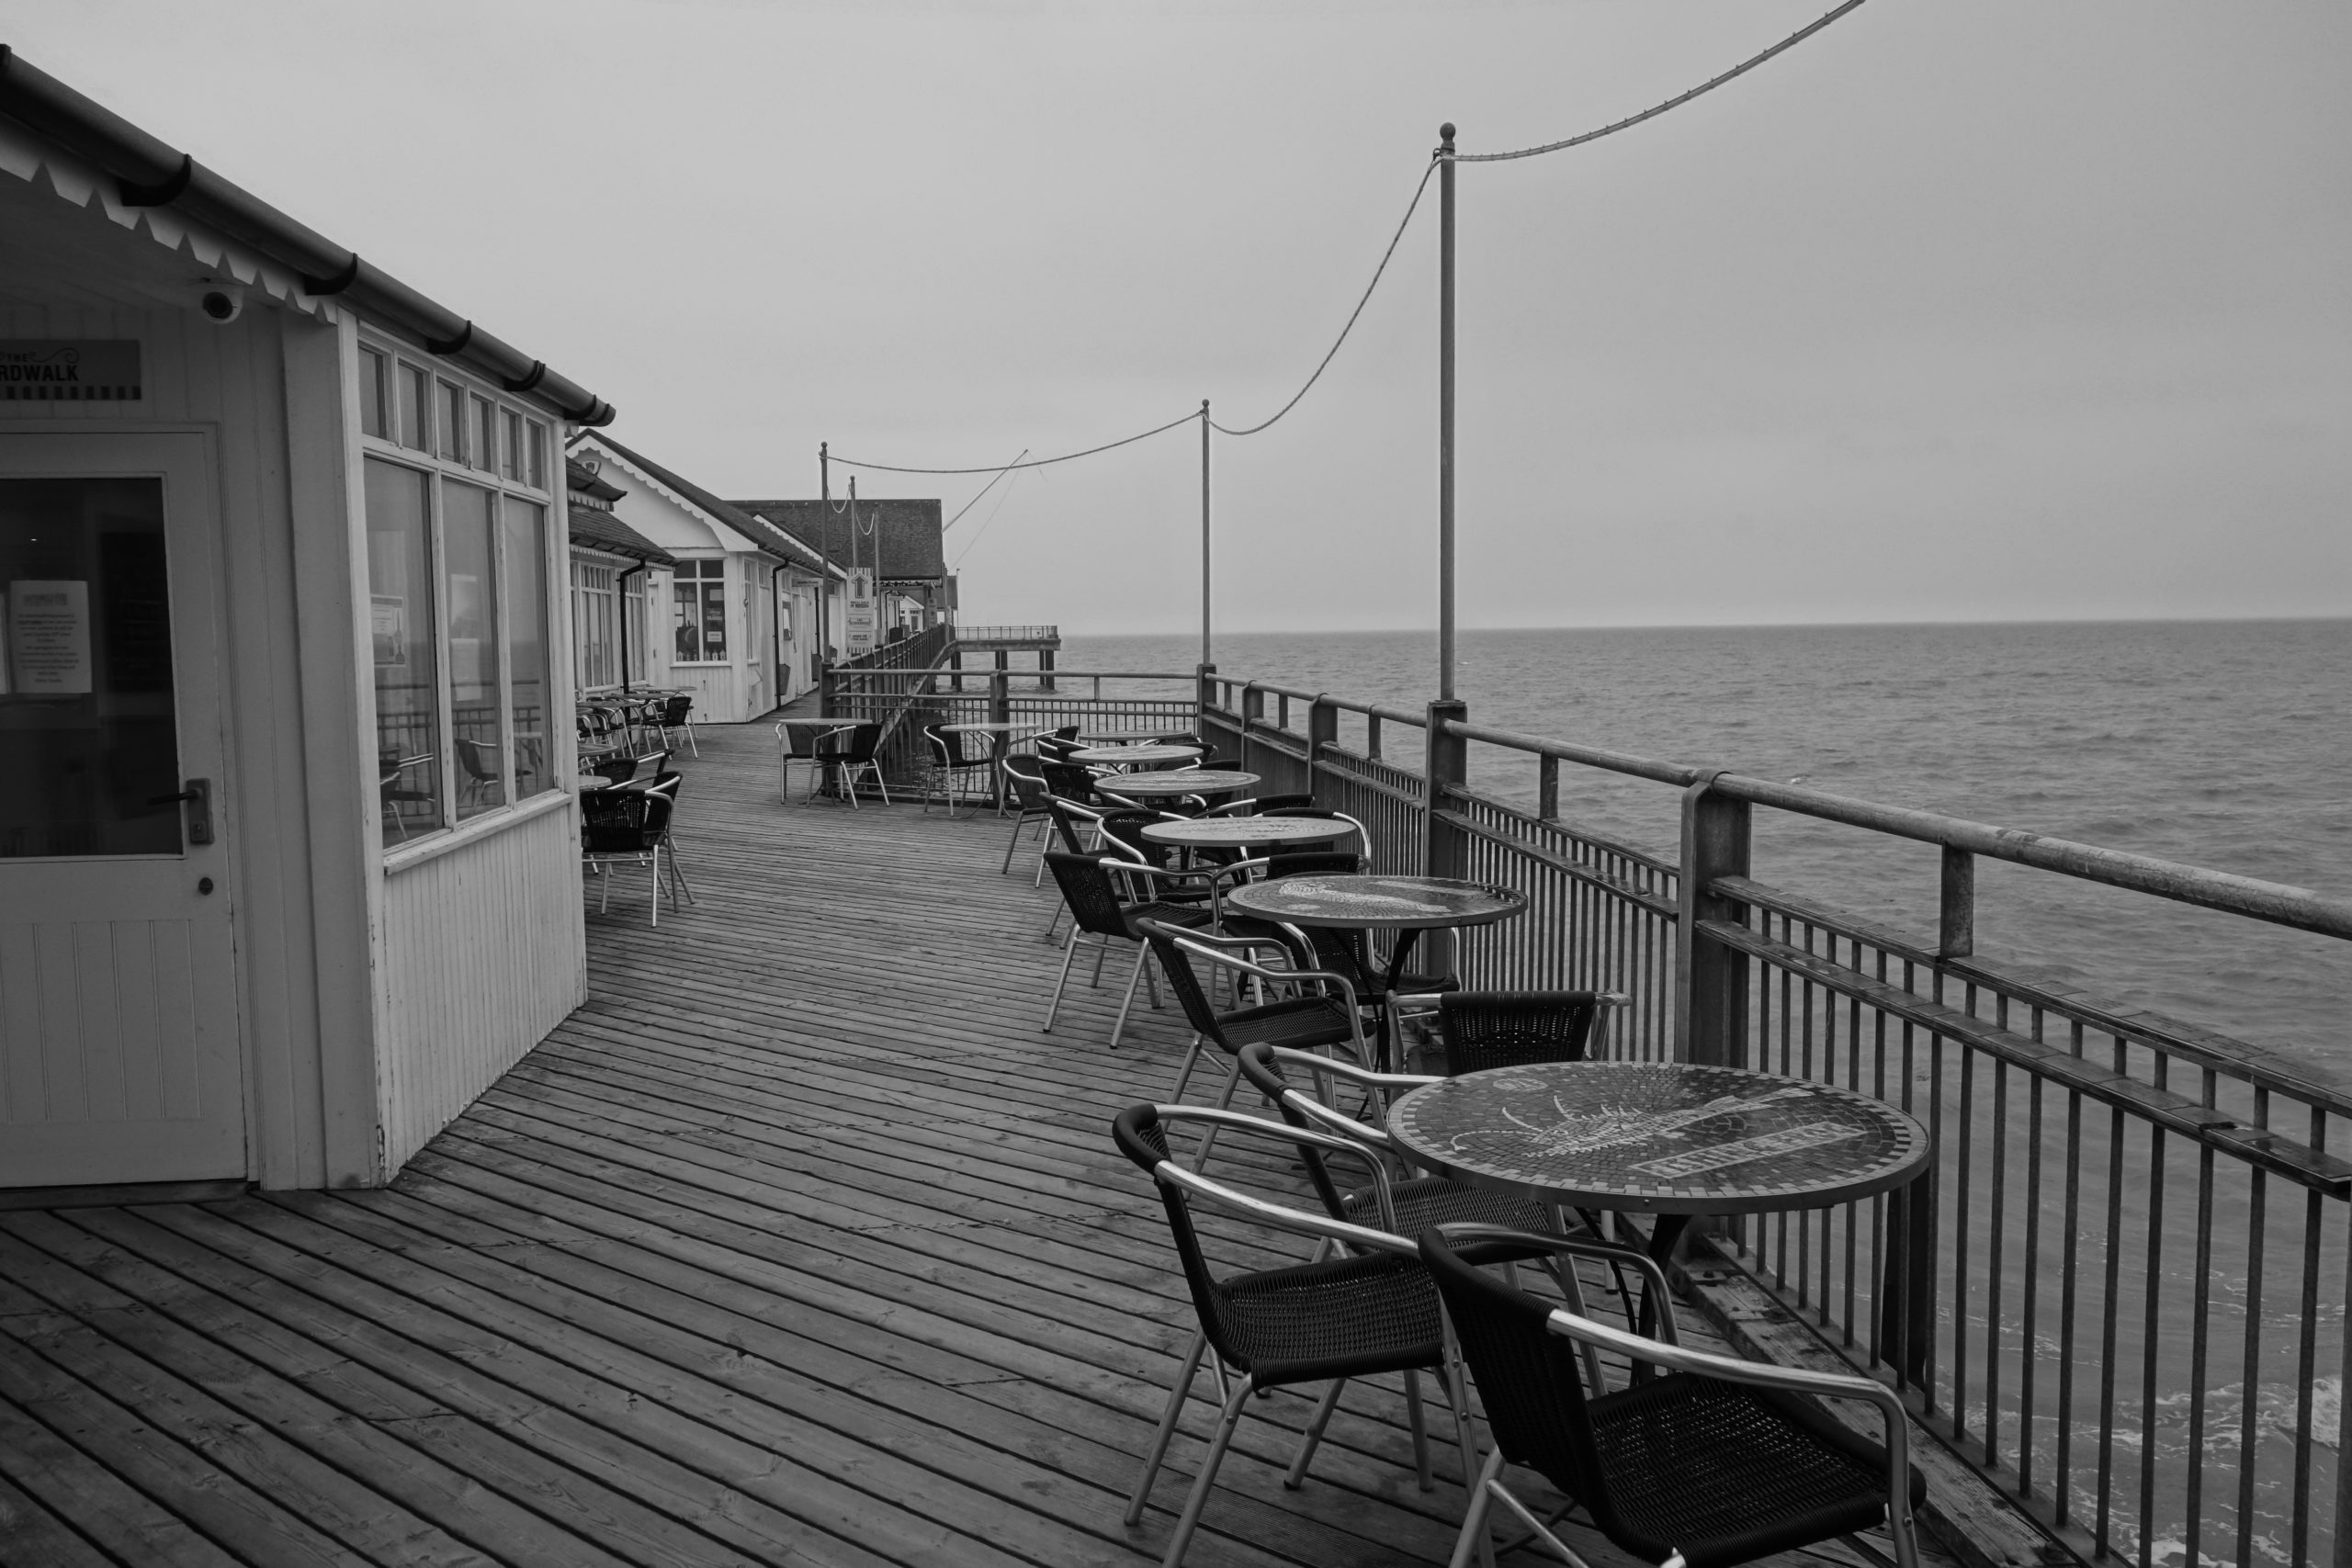 A set of tables on a pier in Suffolk, England